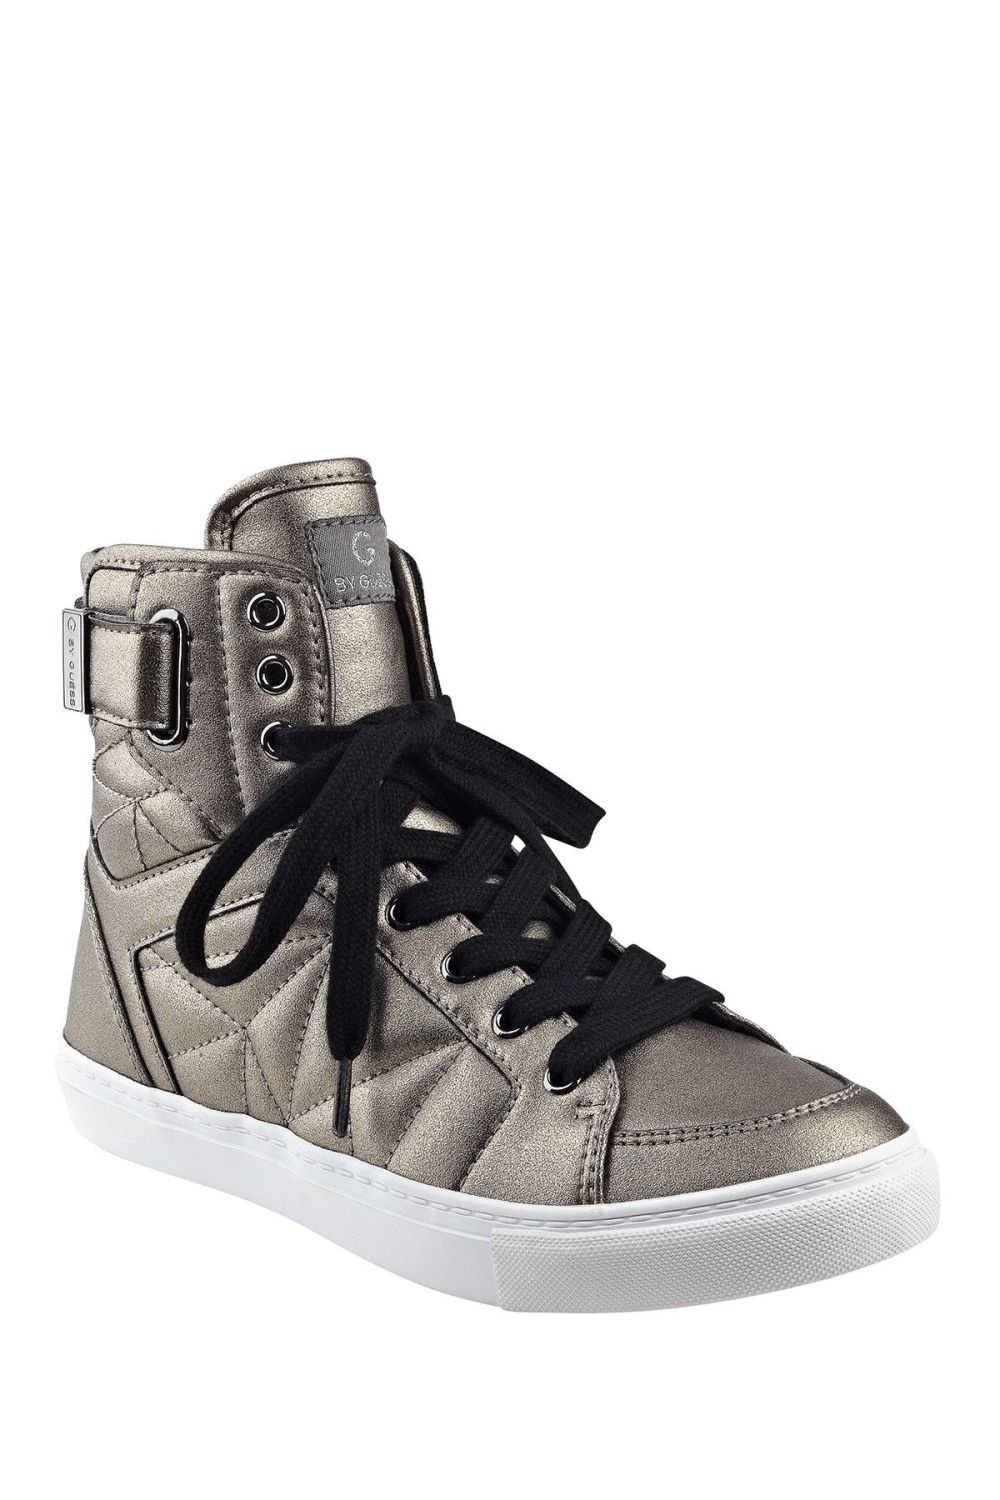 G by GUESS black & gold high-top Size: 8.5